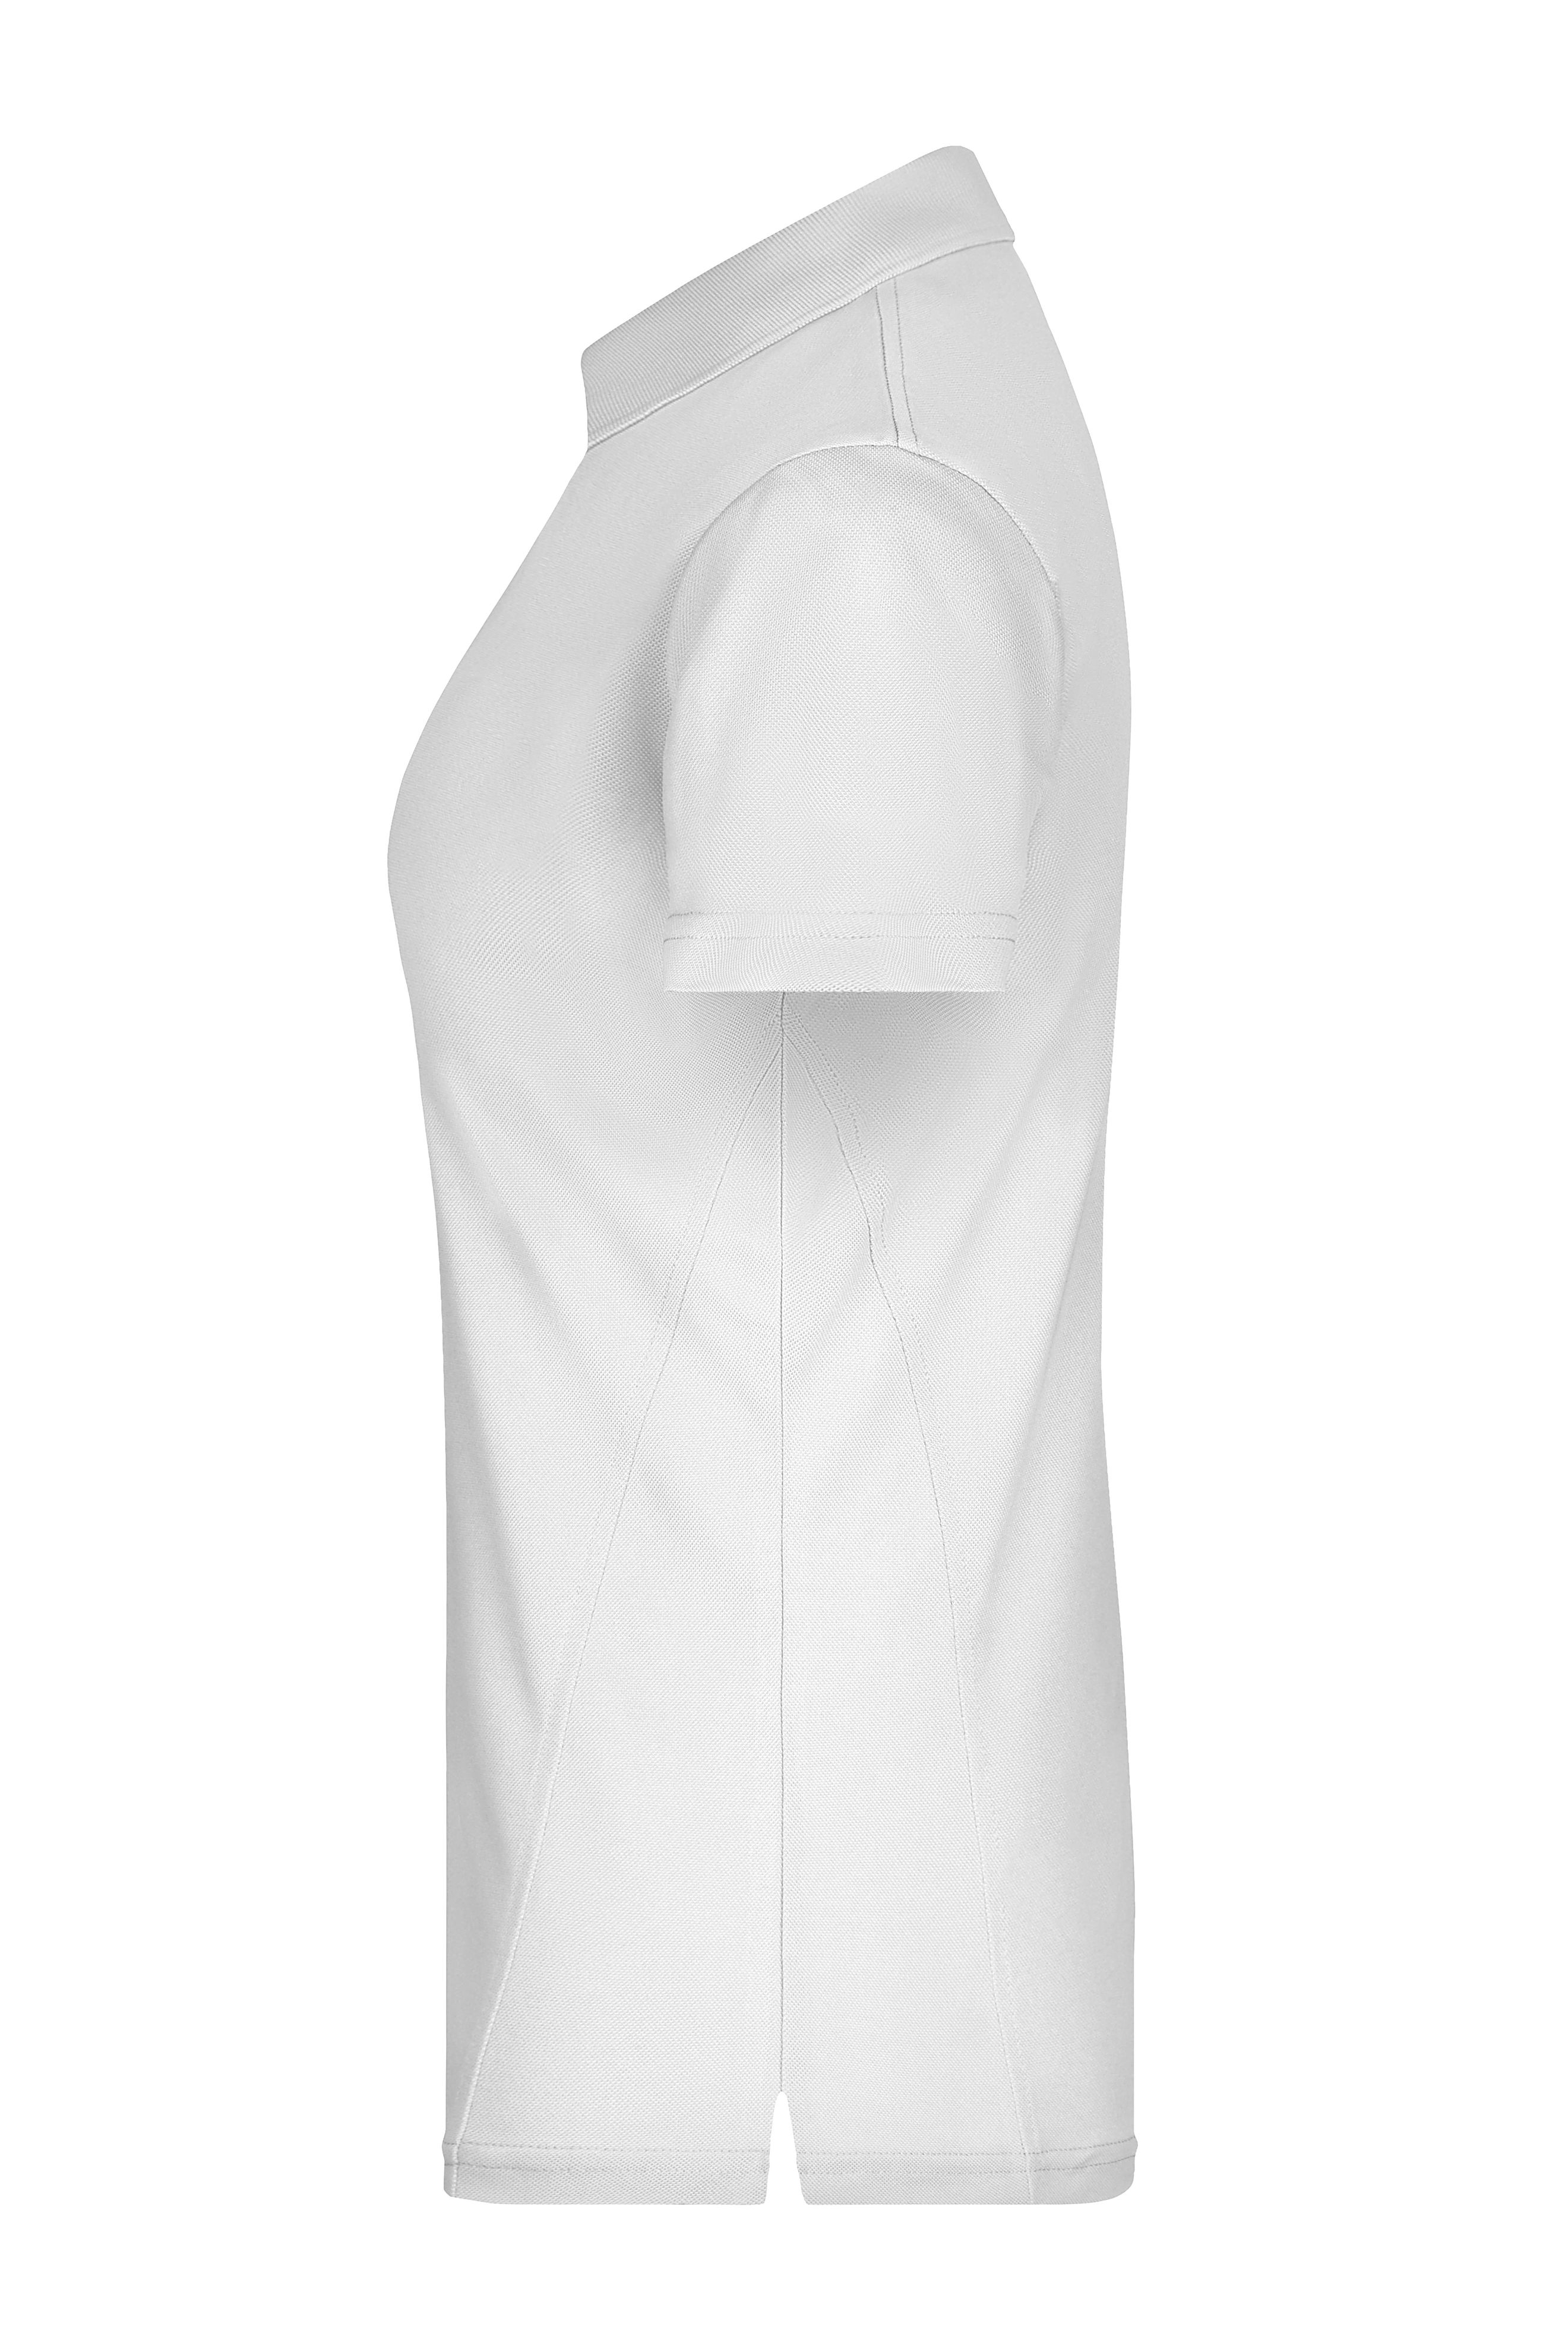 Ladies' Polo High Performance JN411 Funktionspolo